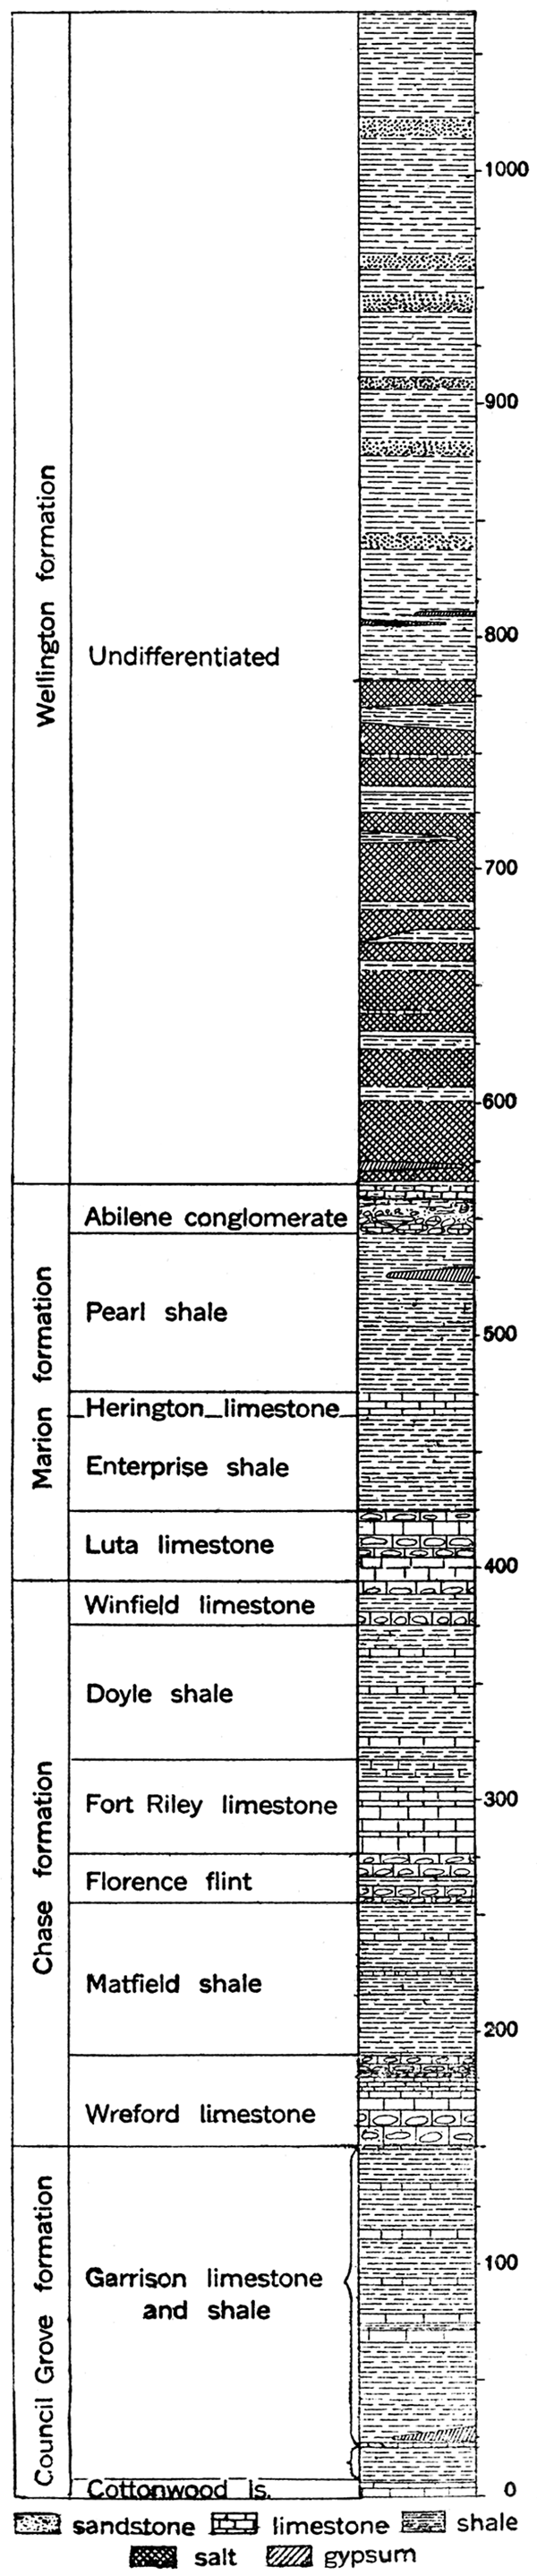 Generalized section of the Big Blue group of the Permian in Kansas.